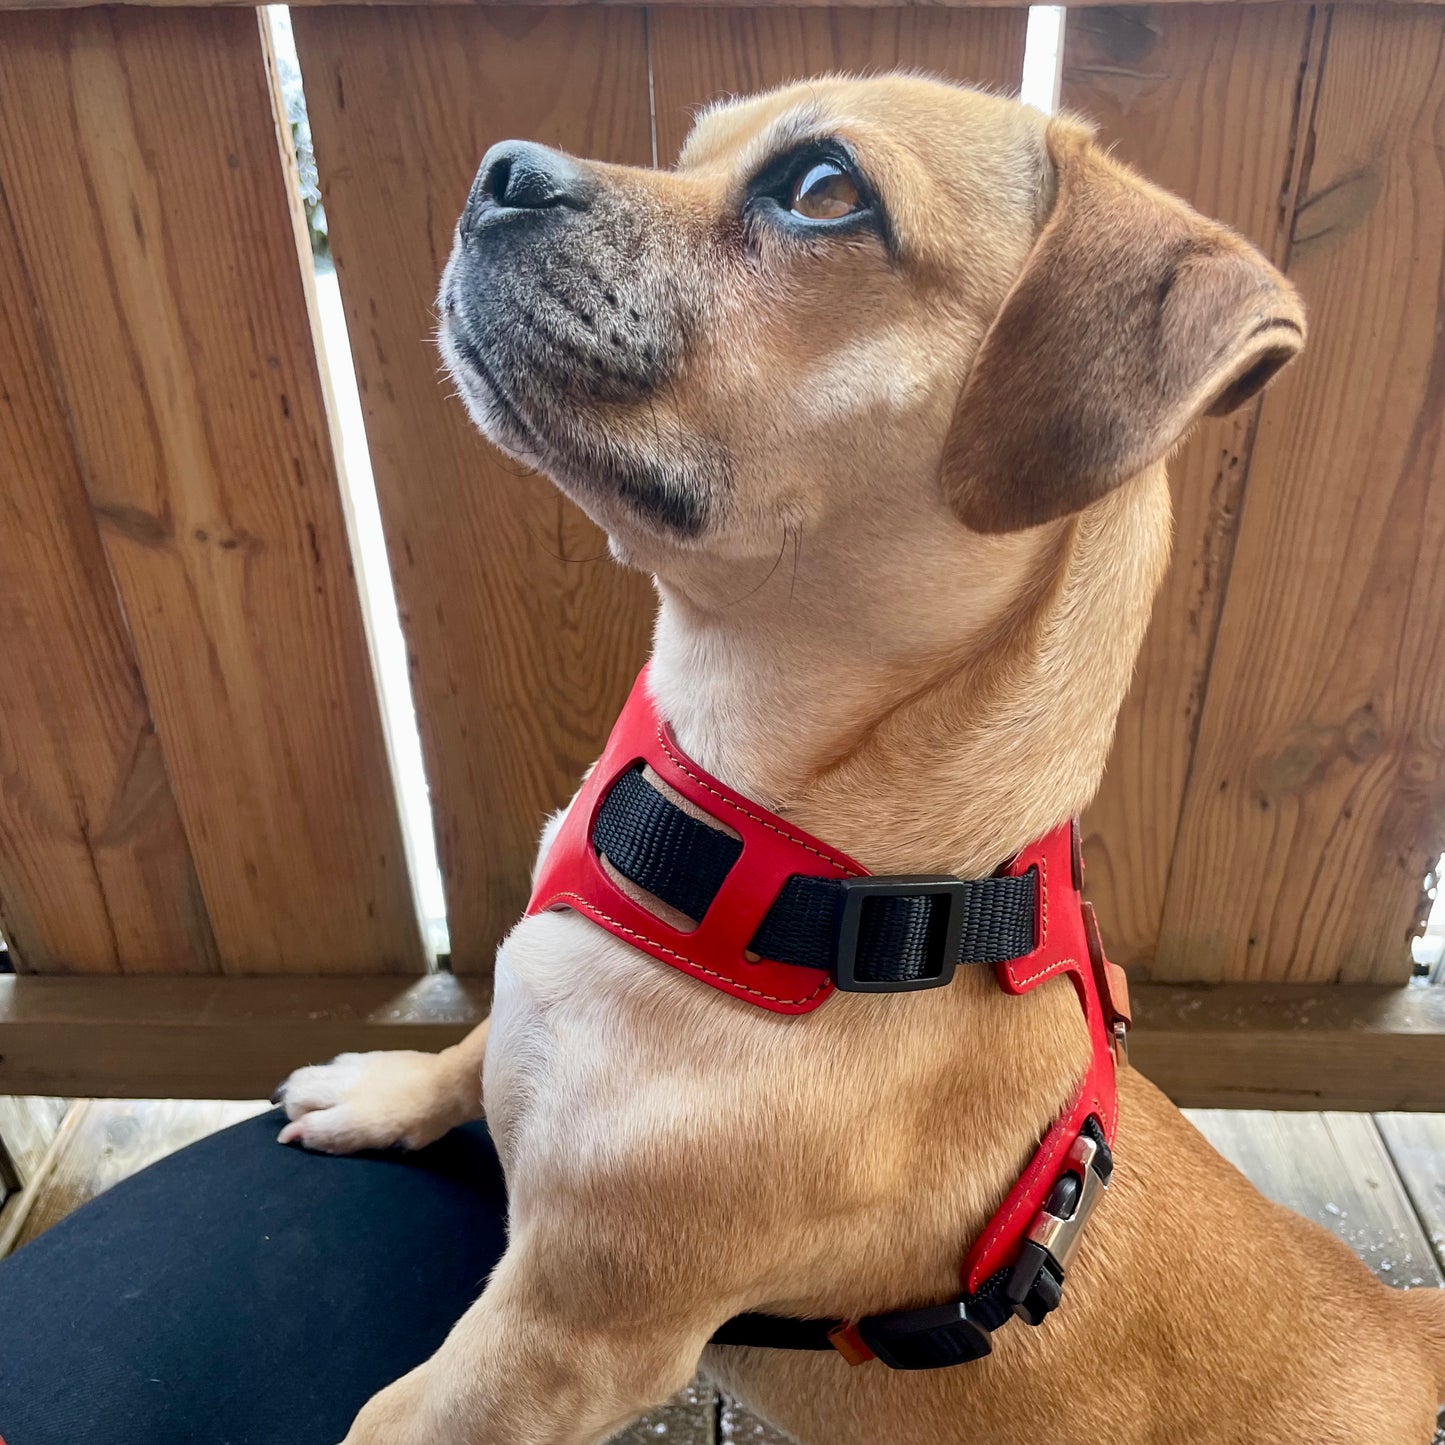 Red Leather Harness & Lead Set